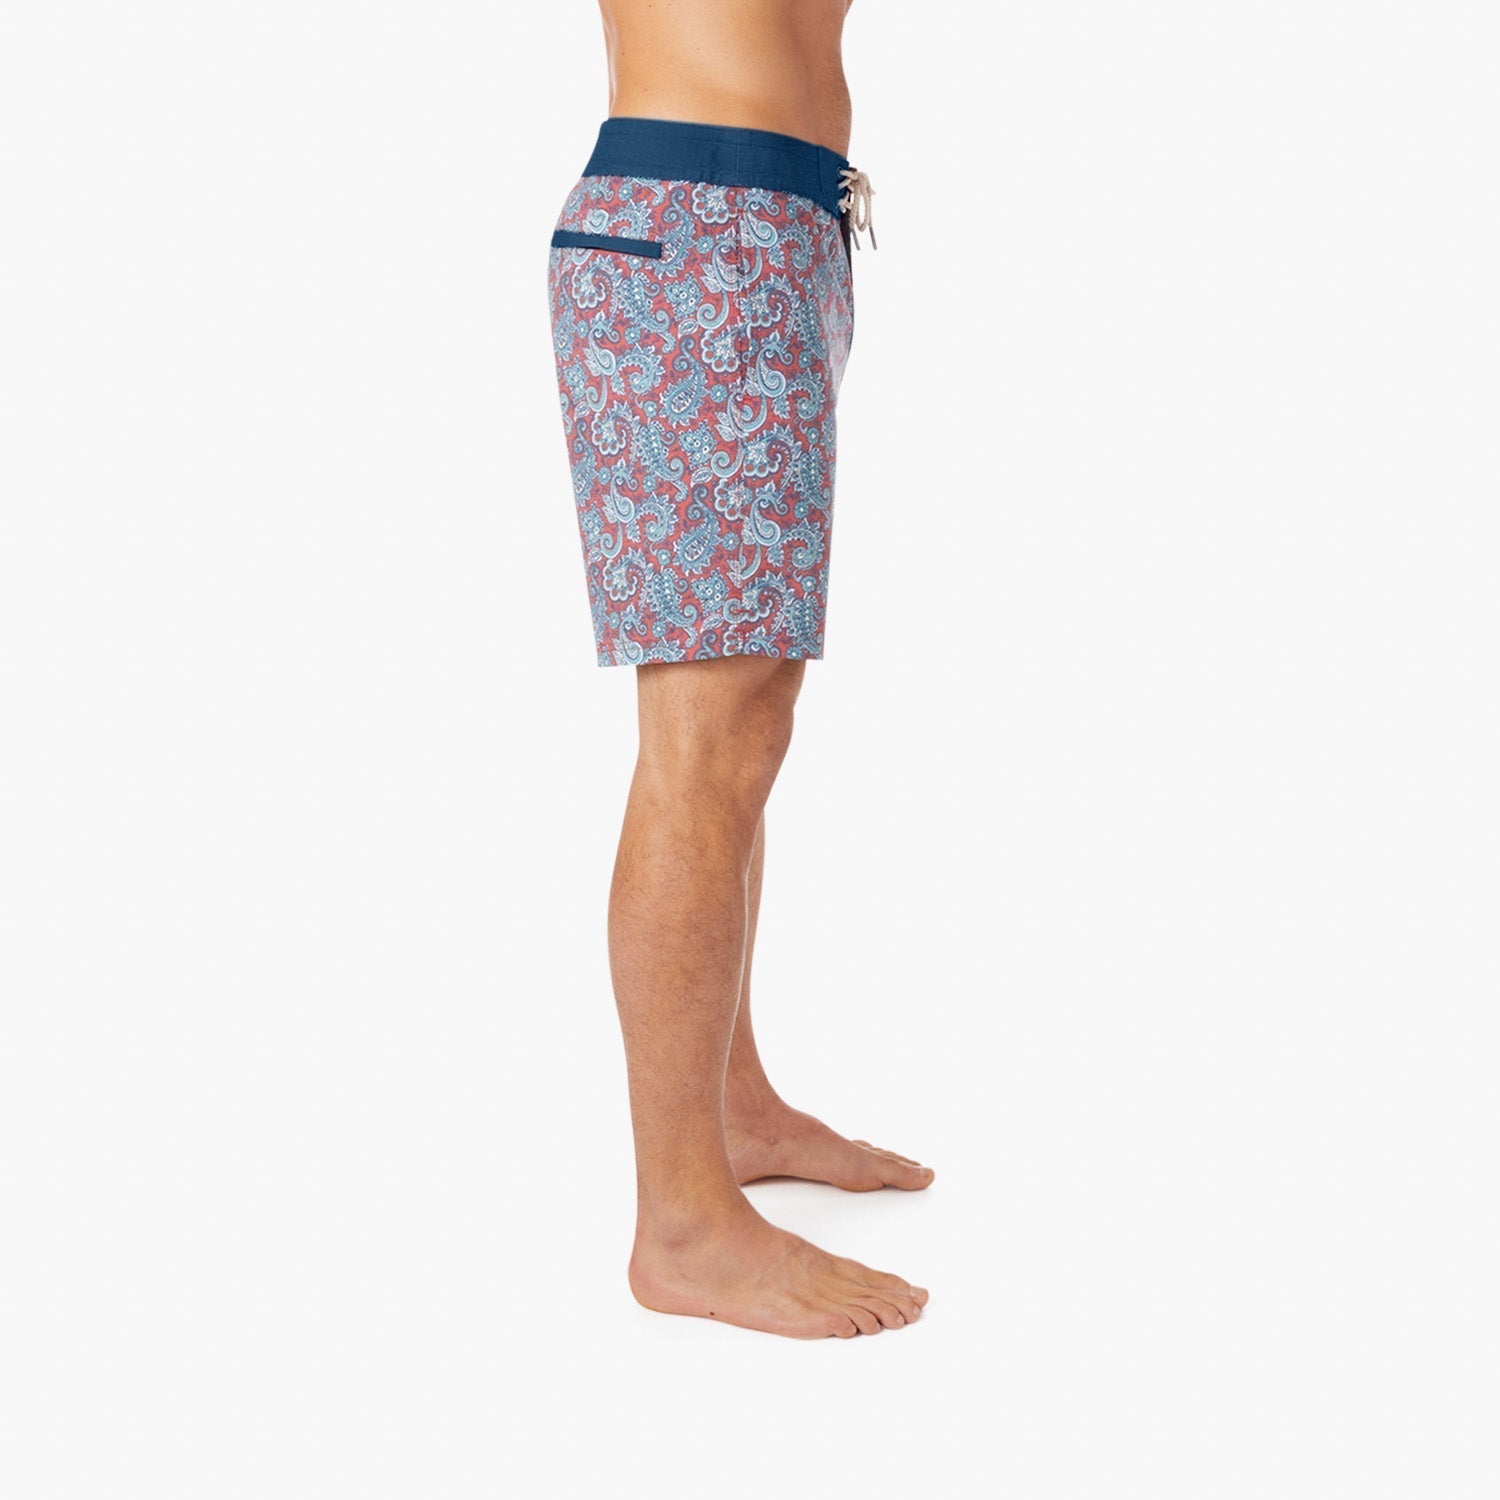 a-place-for-all-your-needs-to-buy-the-nautilus-boardshort-red-paisley-sale_3.jpg